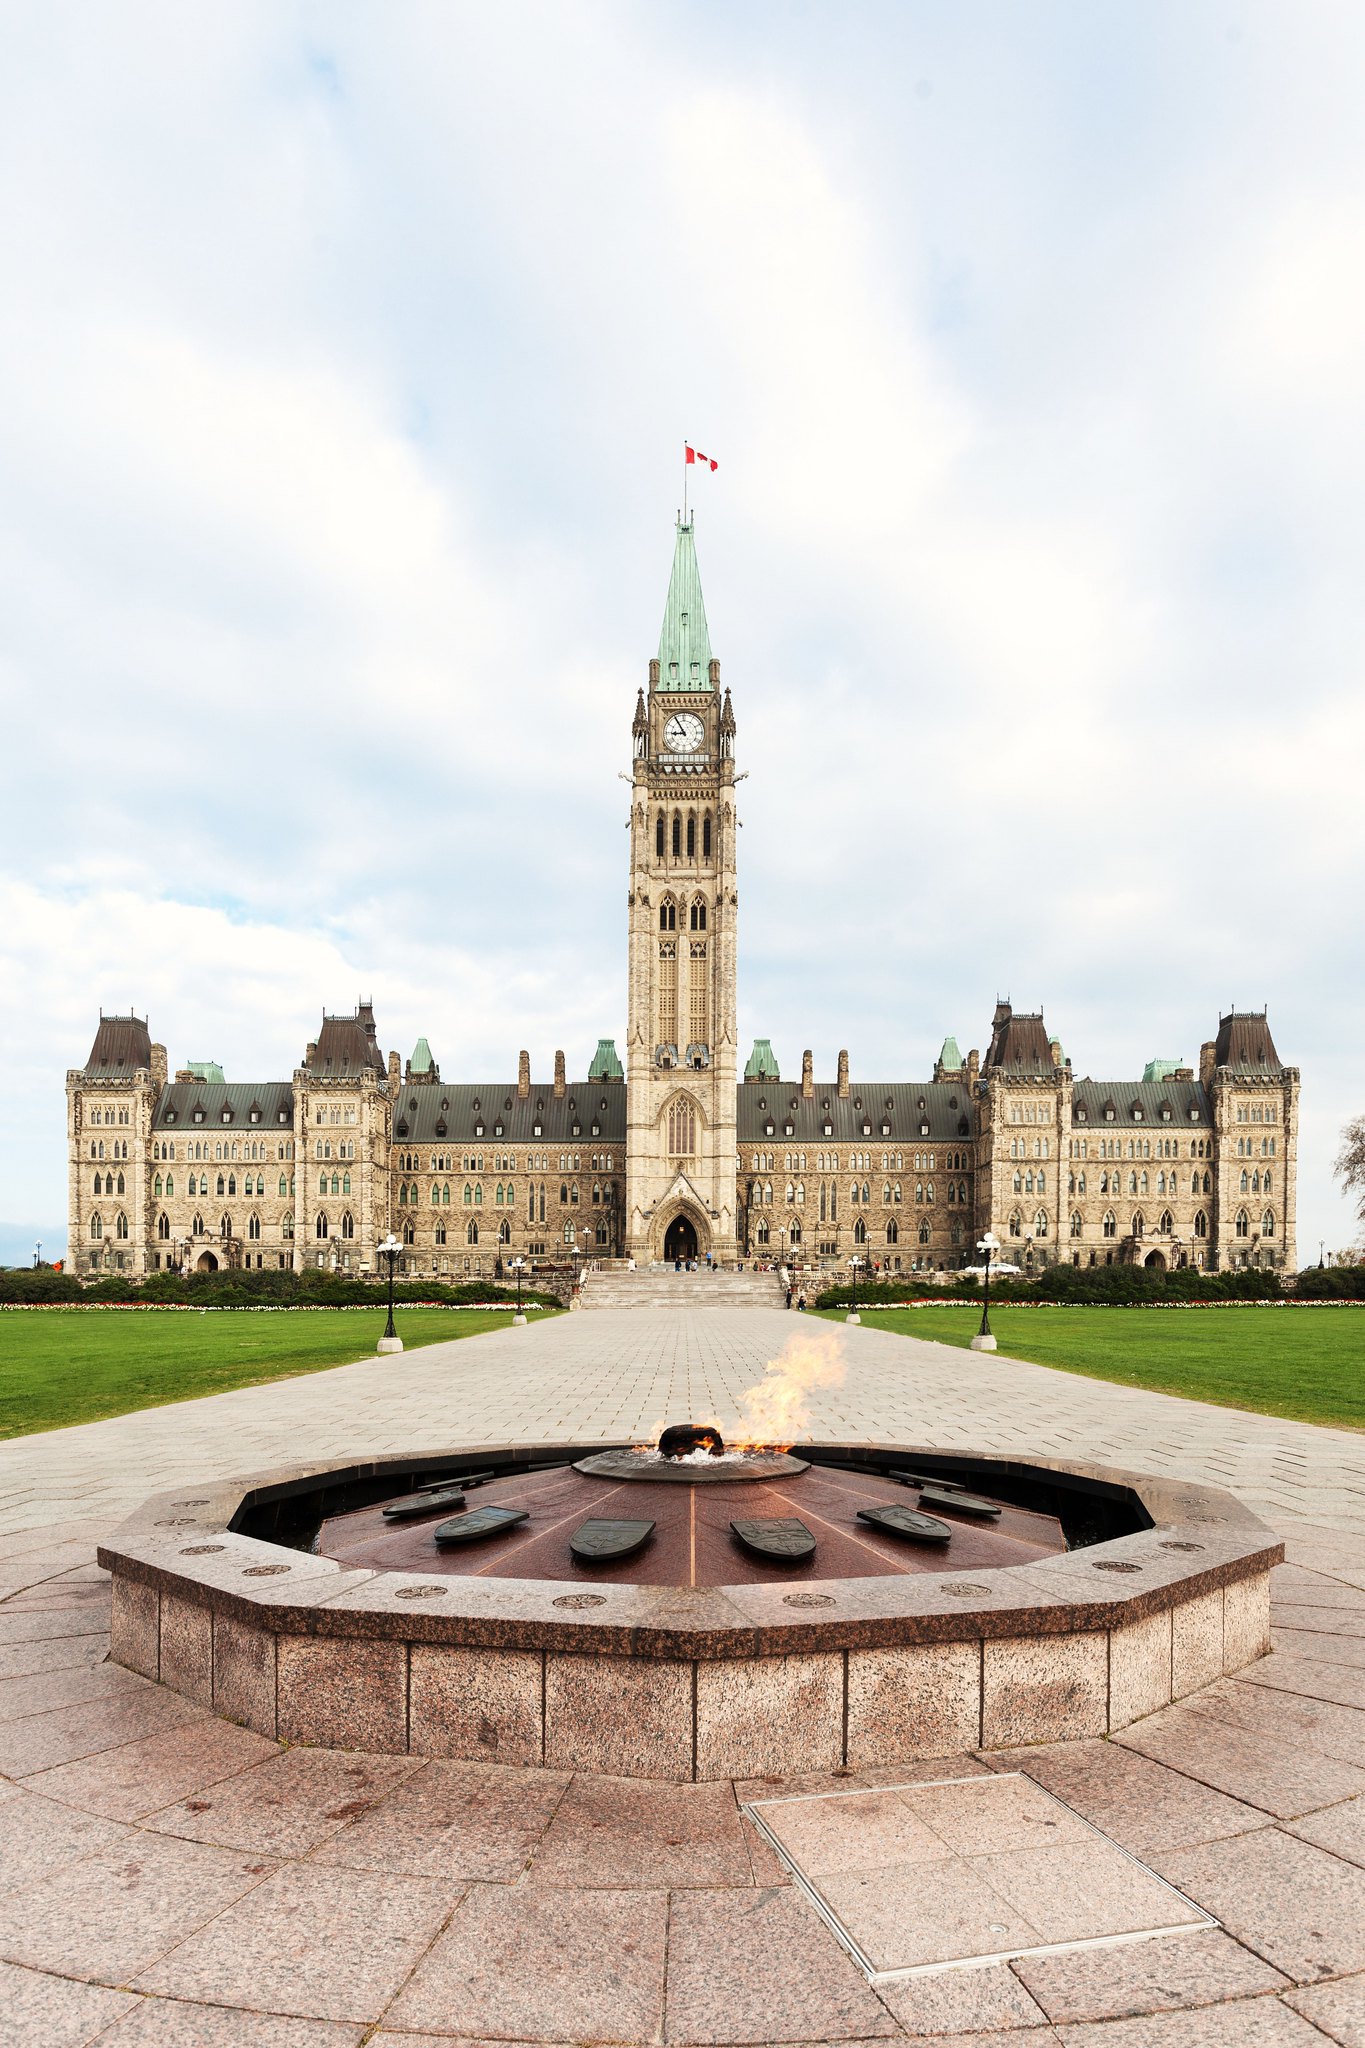 View of the Parliament Building and Centennial Flame in Ottawa, Canada